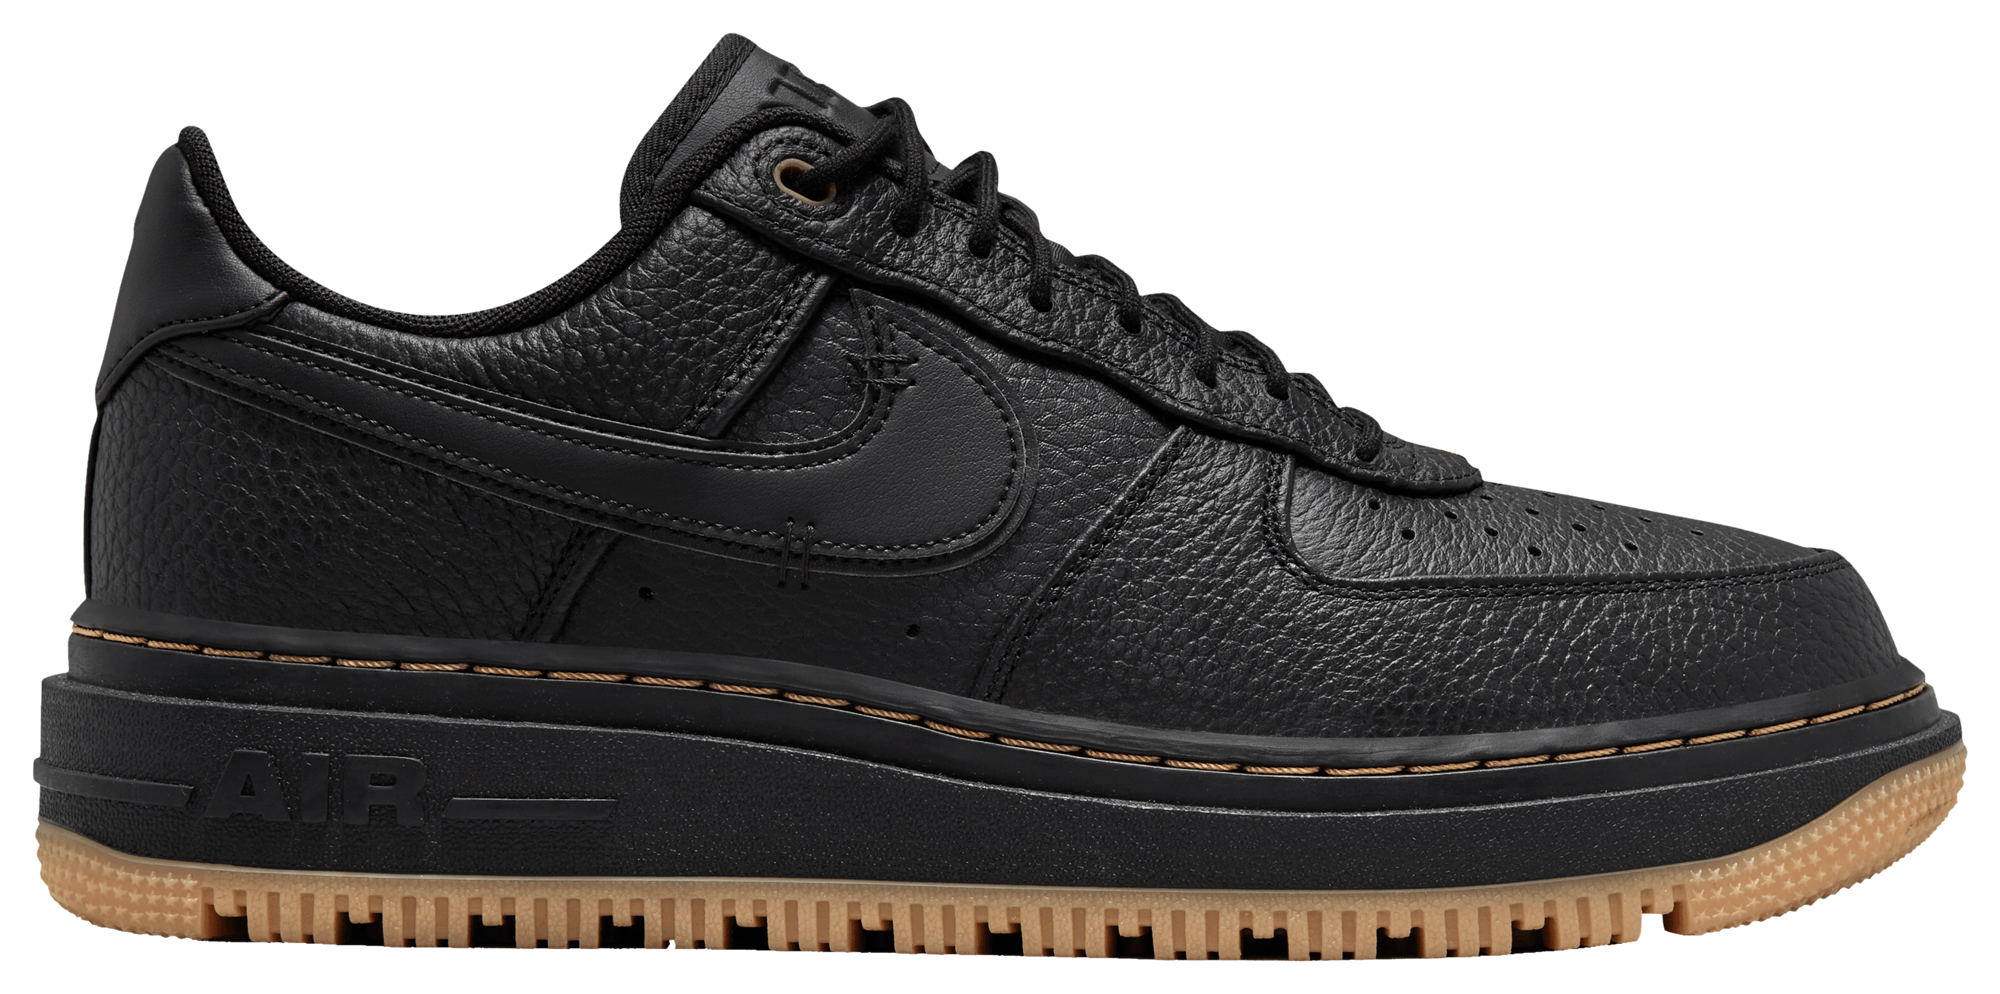 Banquet TV station Barry Nike Air Force 1 Luxe | Foot Locker